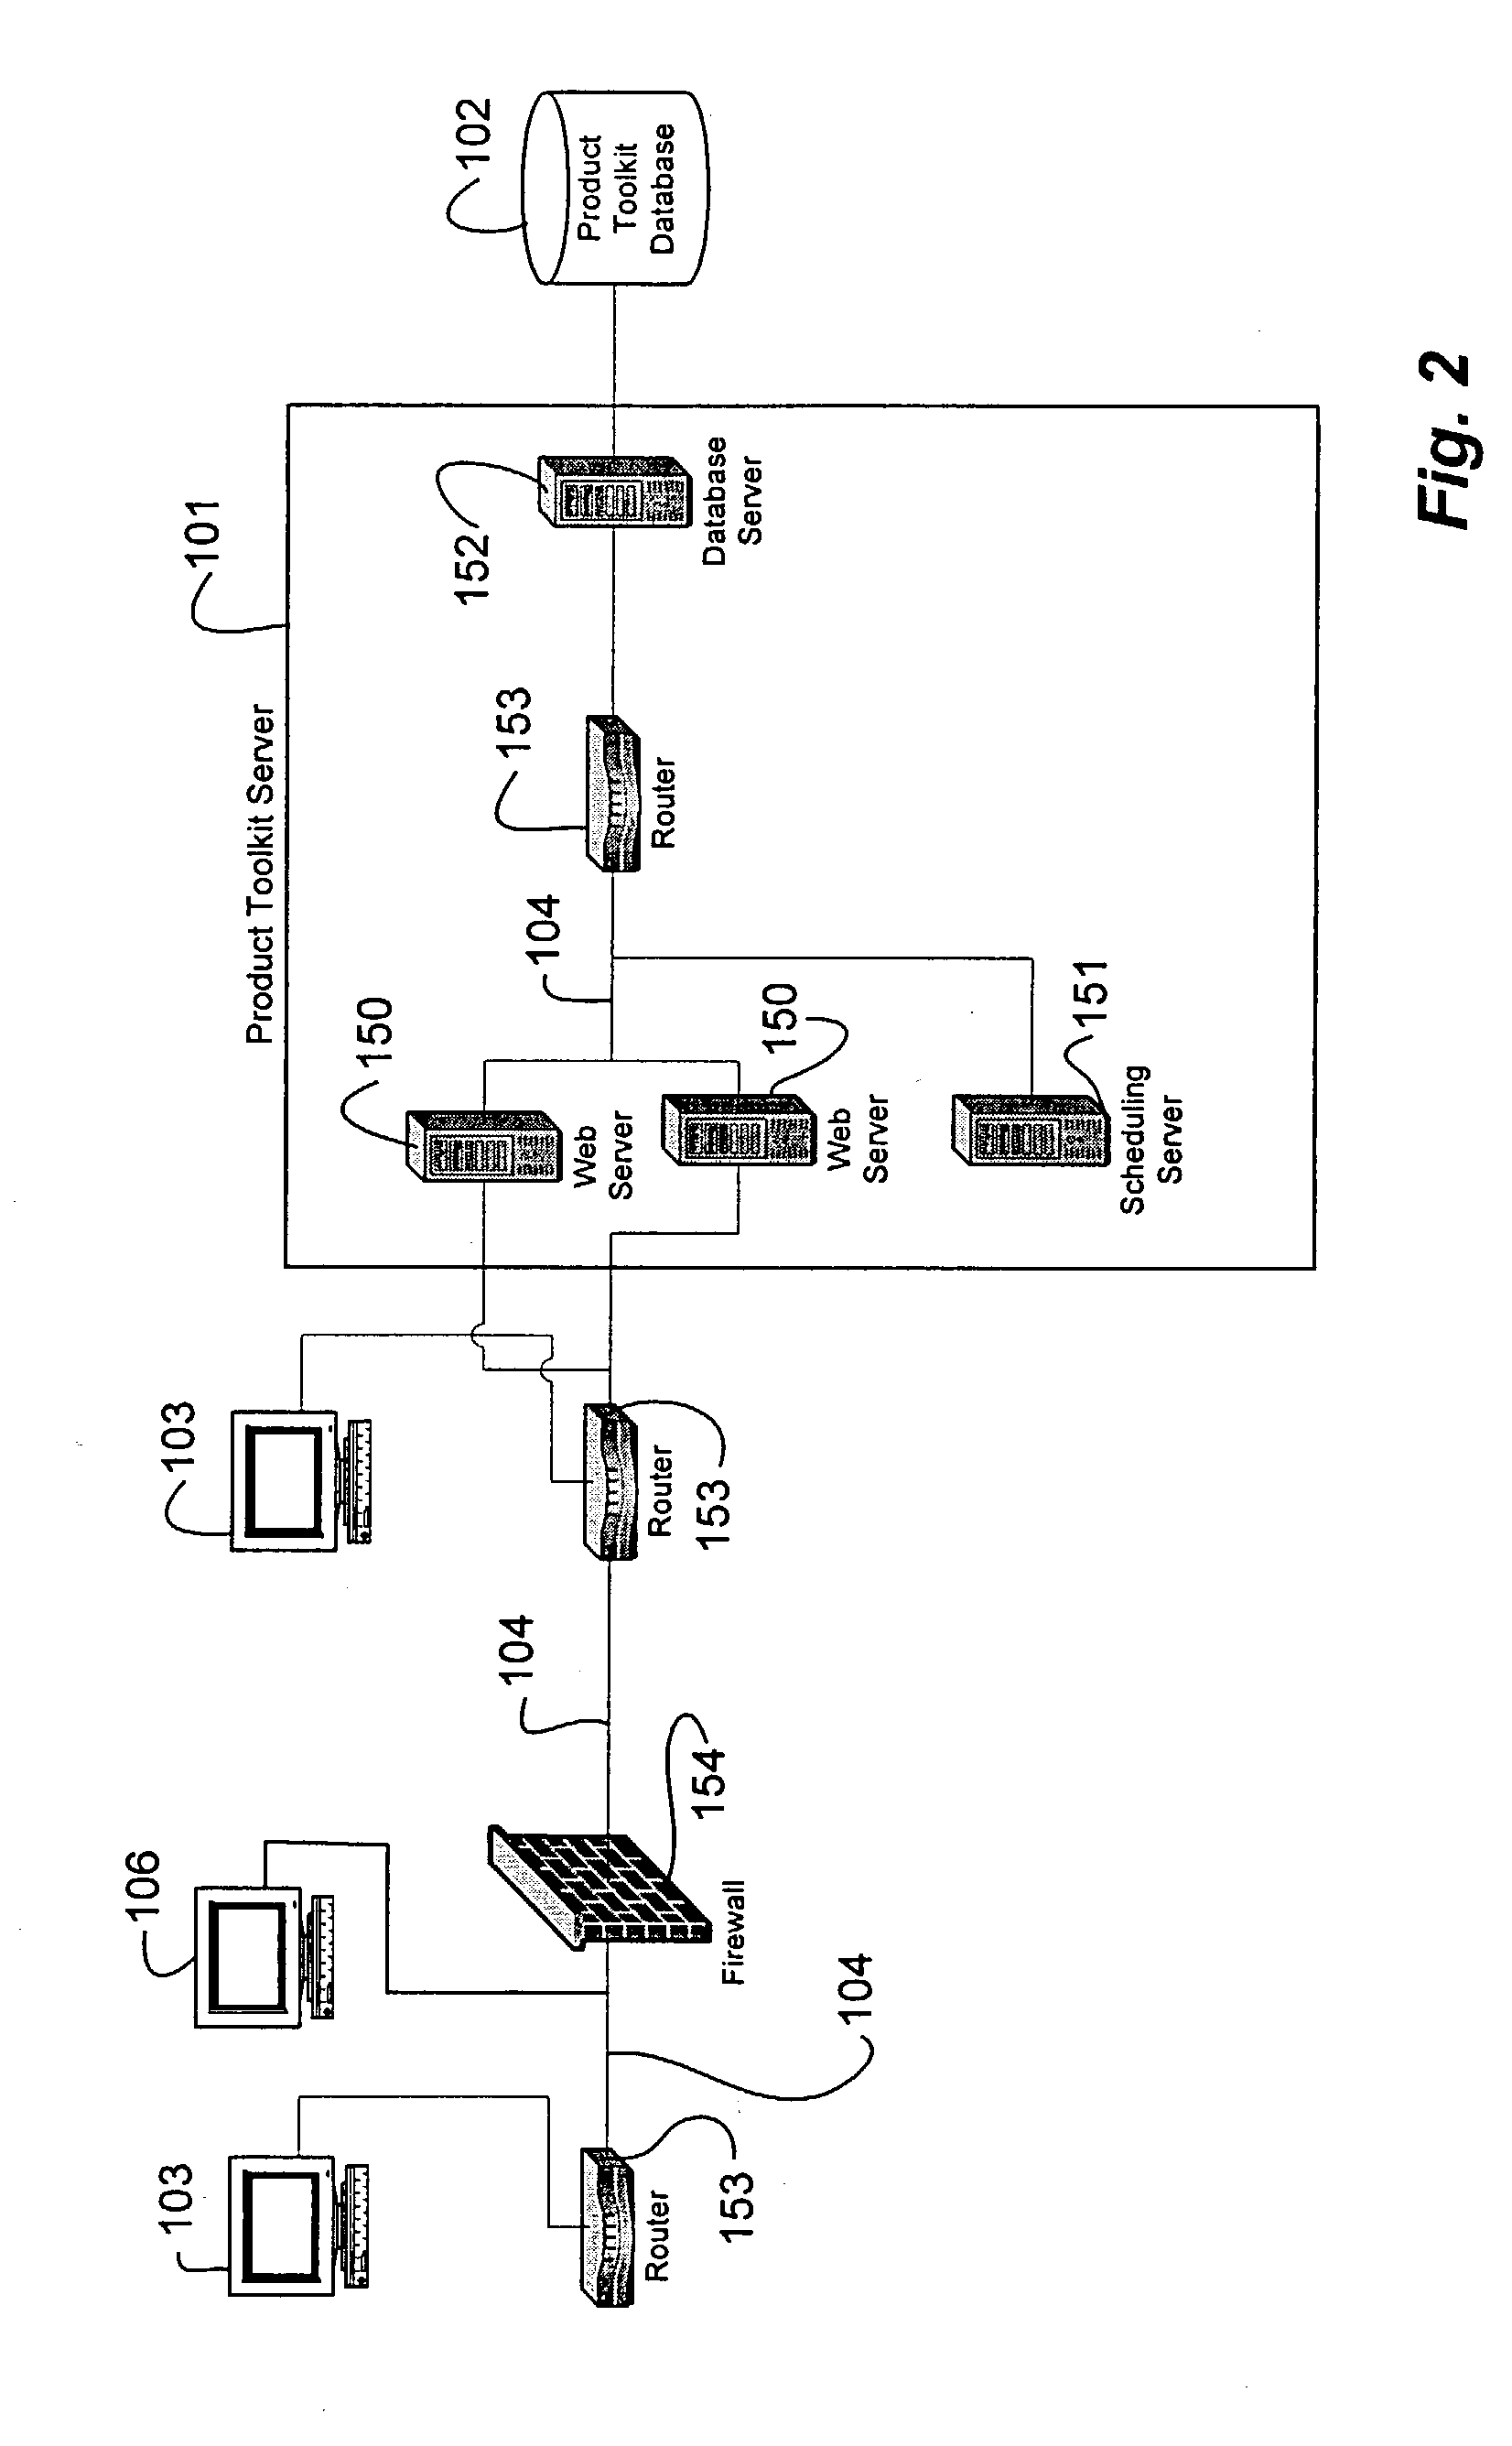 Product toolkit system and method